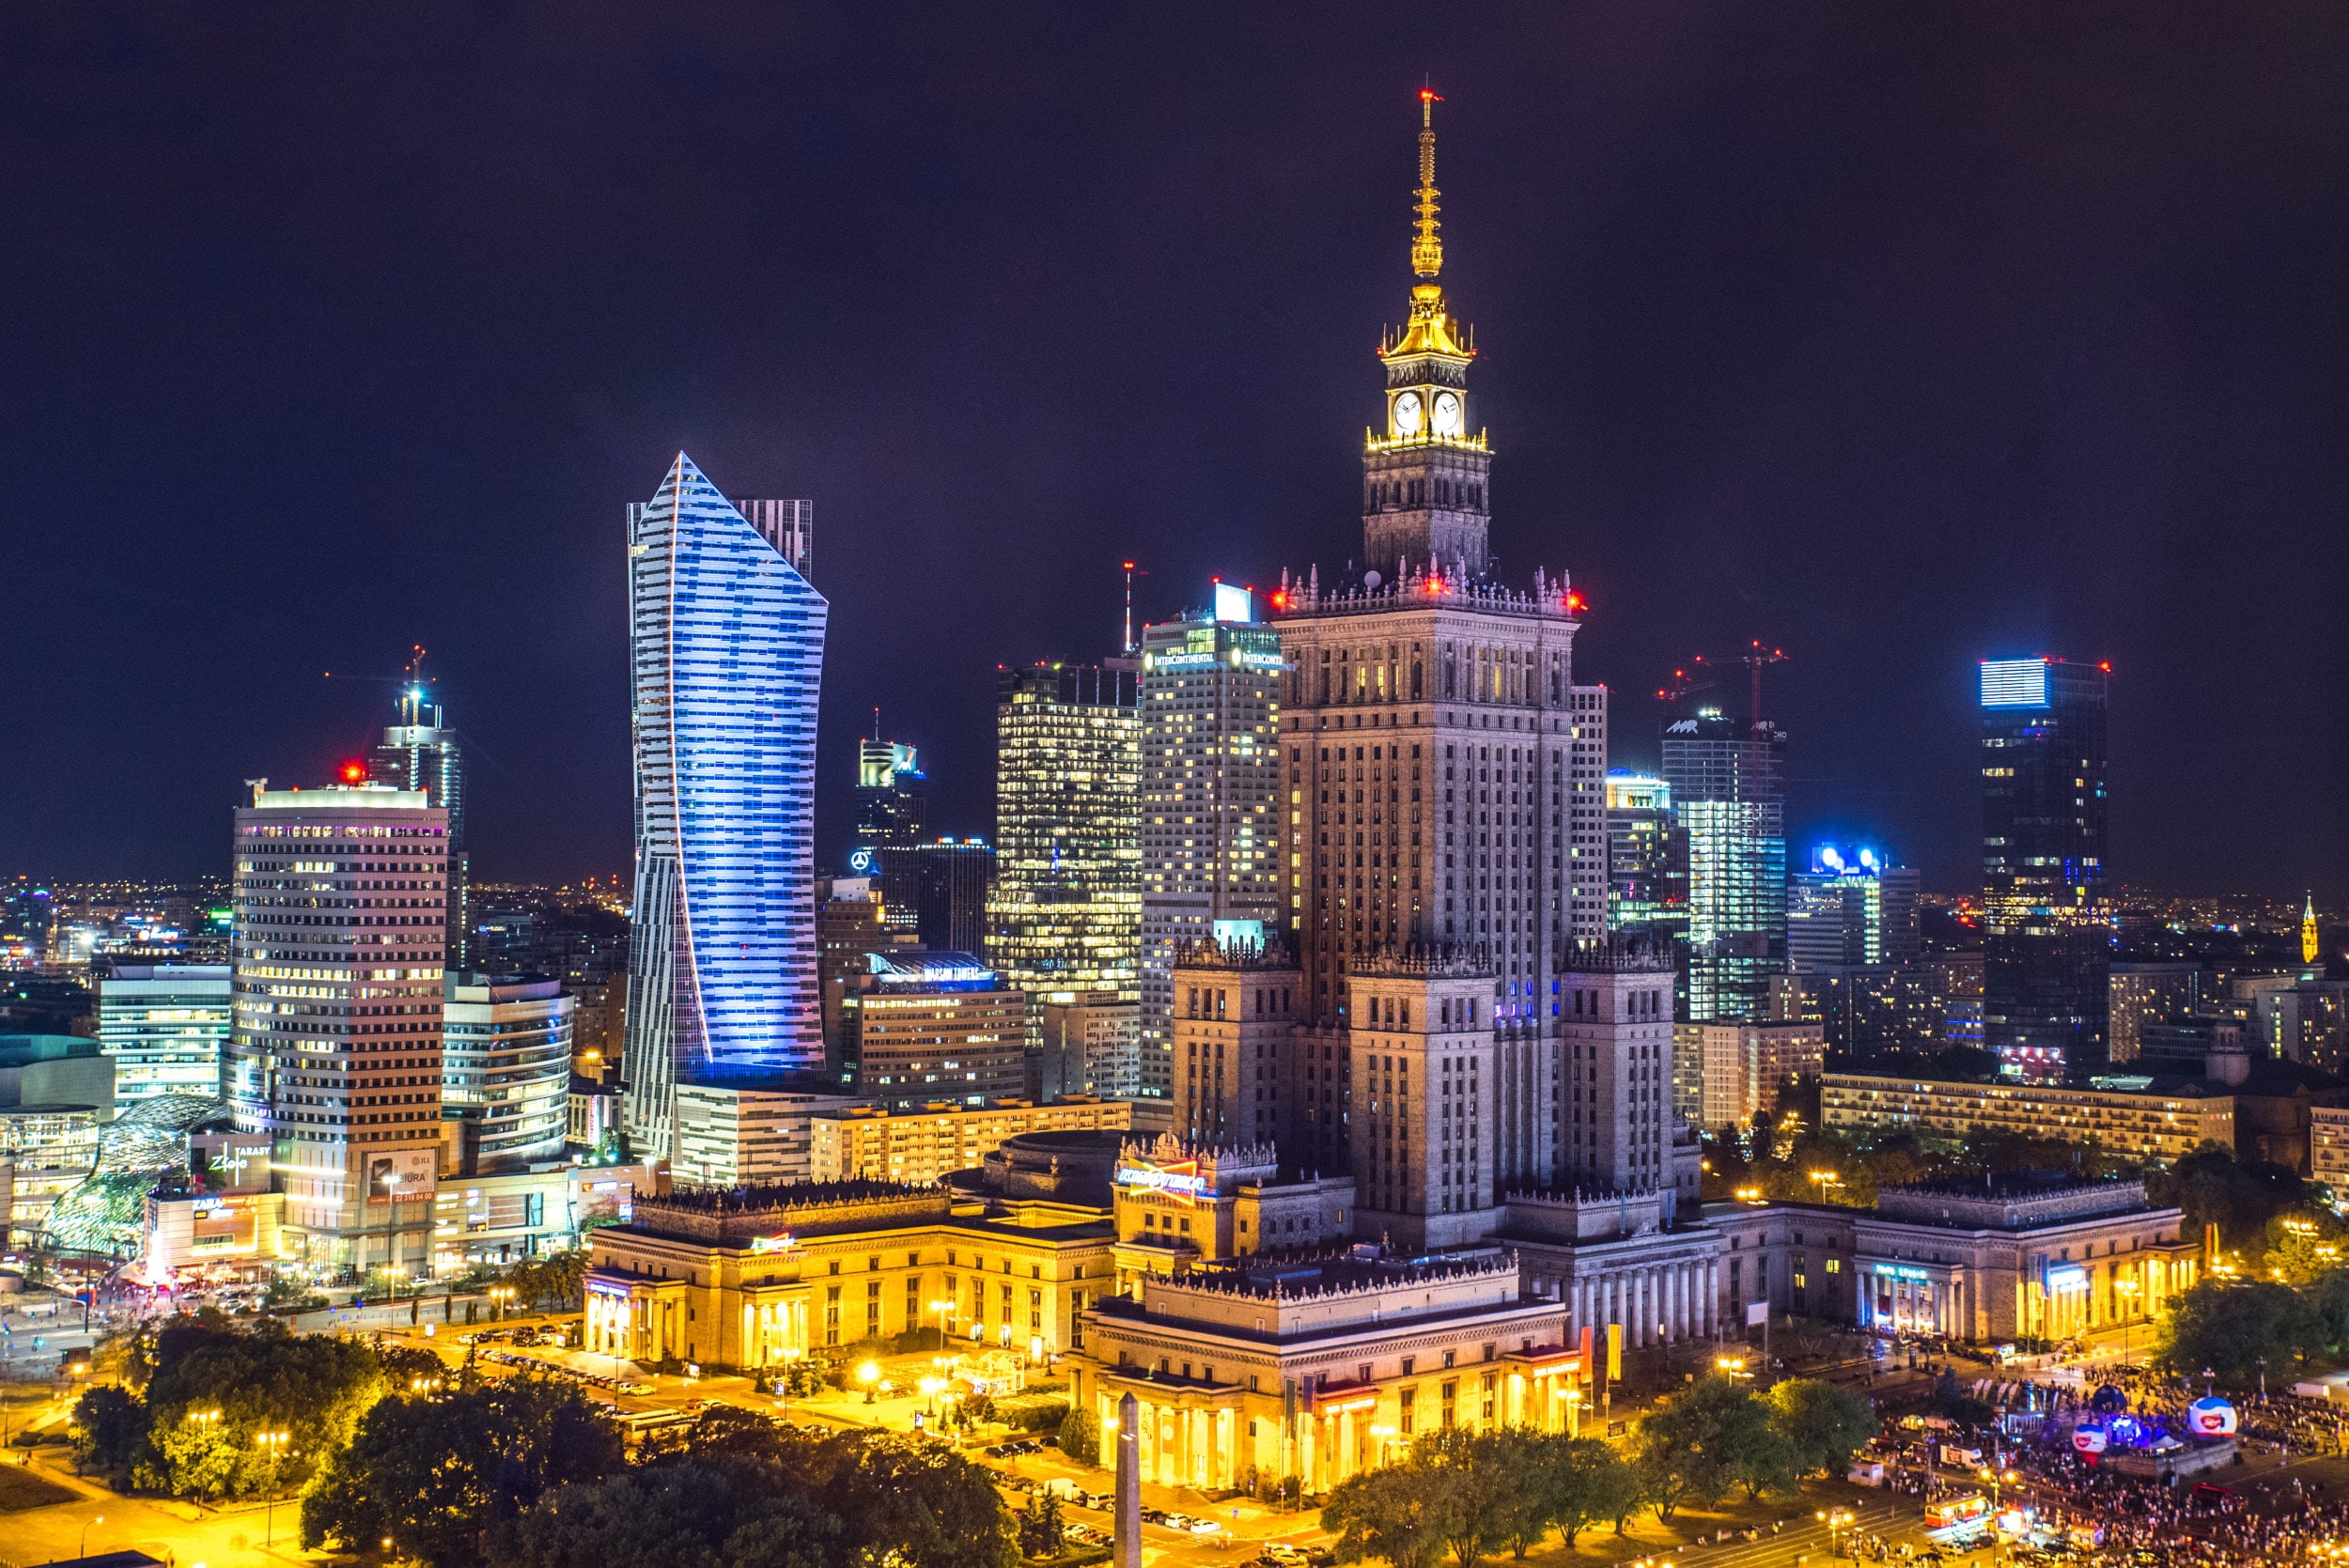 Poland, lights, night, HDR, Warsaw, city, skycrapers